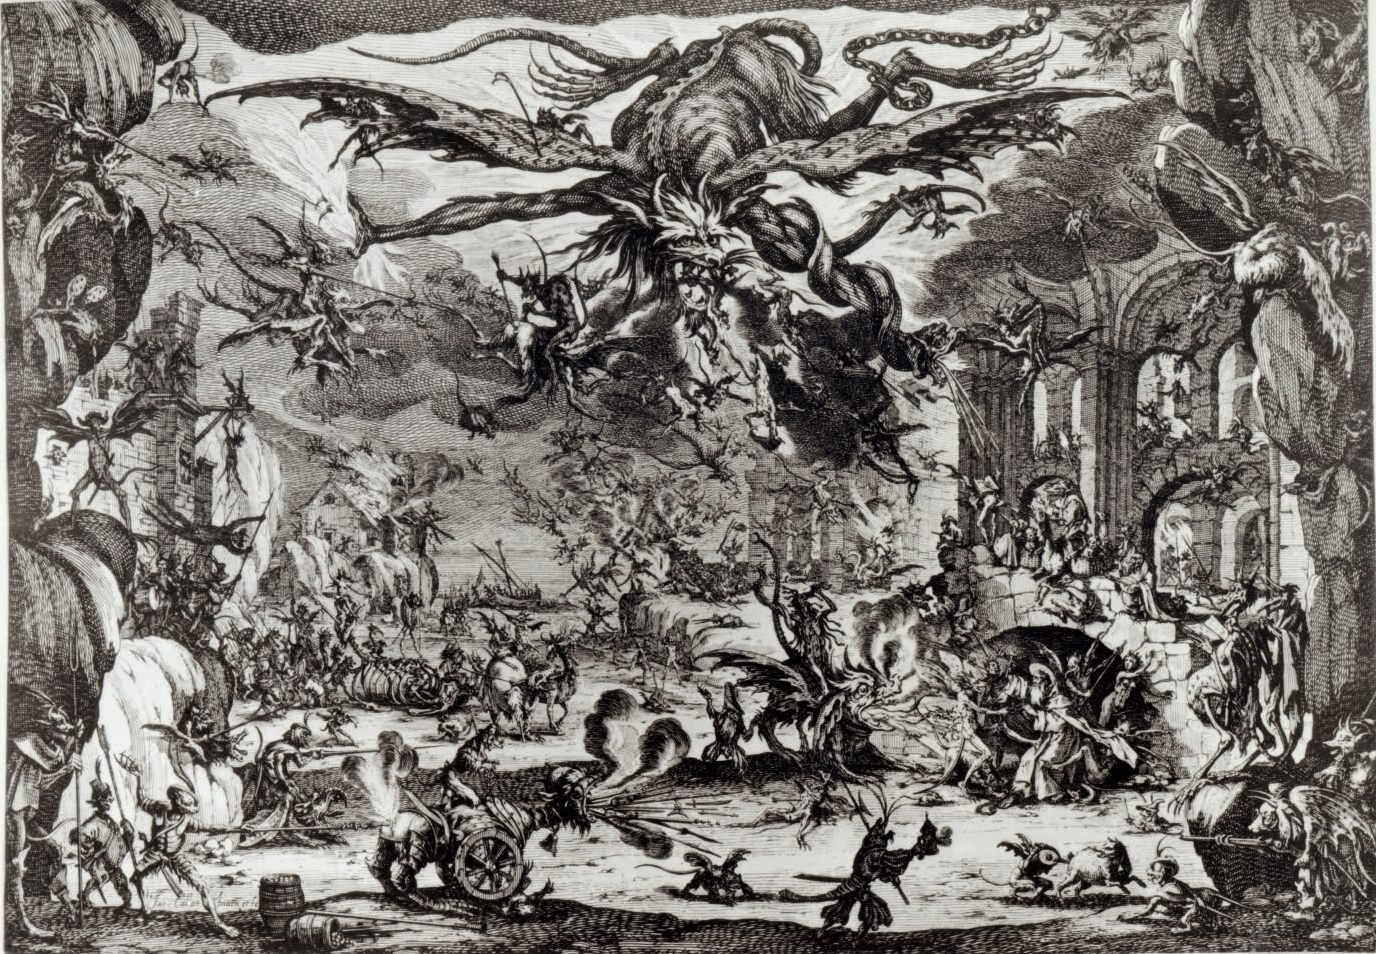 Jacque Callot's The Temptation of St. Anthony (ca. 1635)